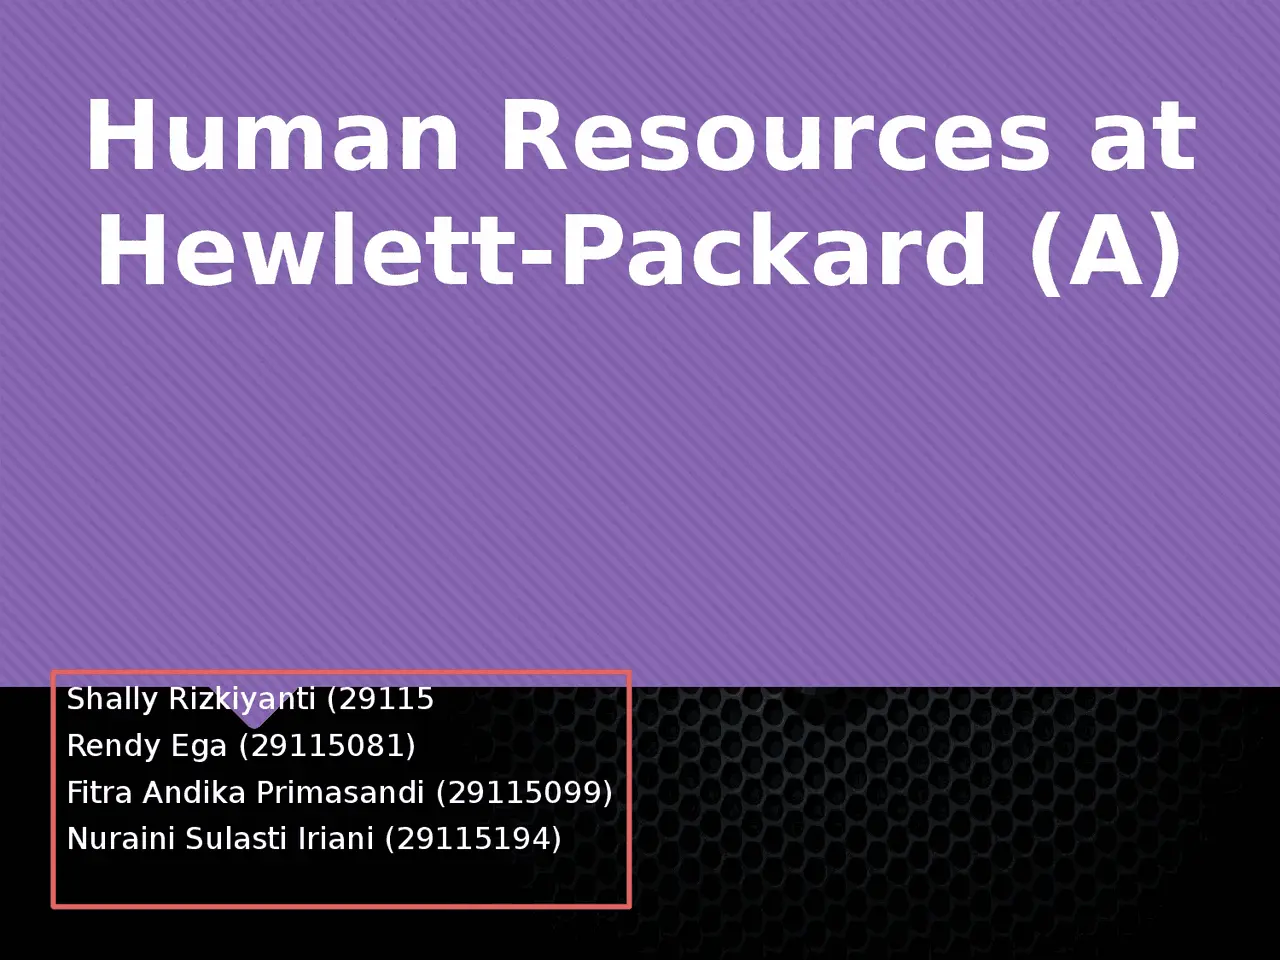 hewlett packard human resources - What is the phone number for HPE Benefits Center